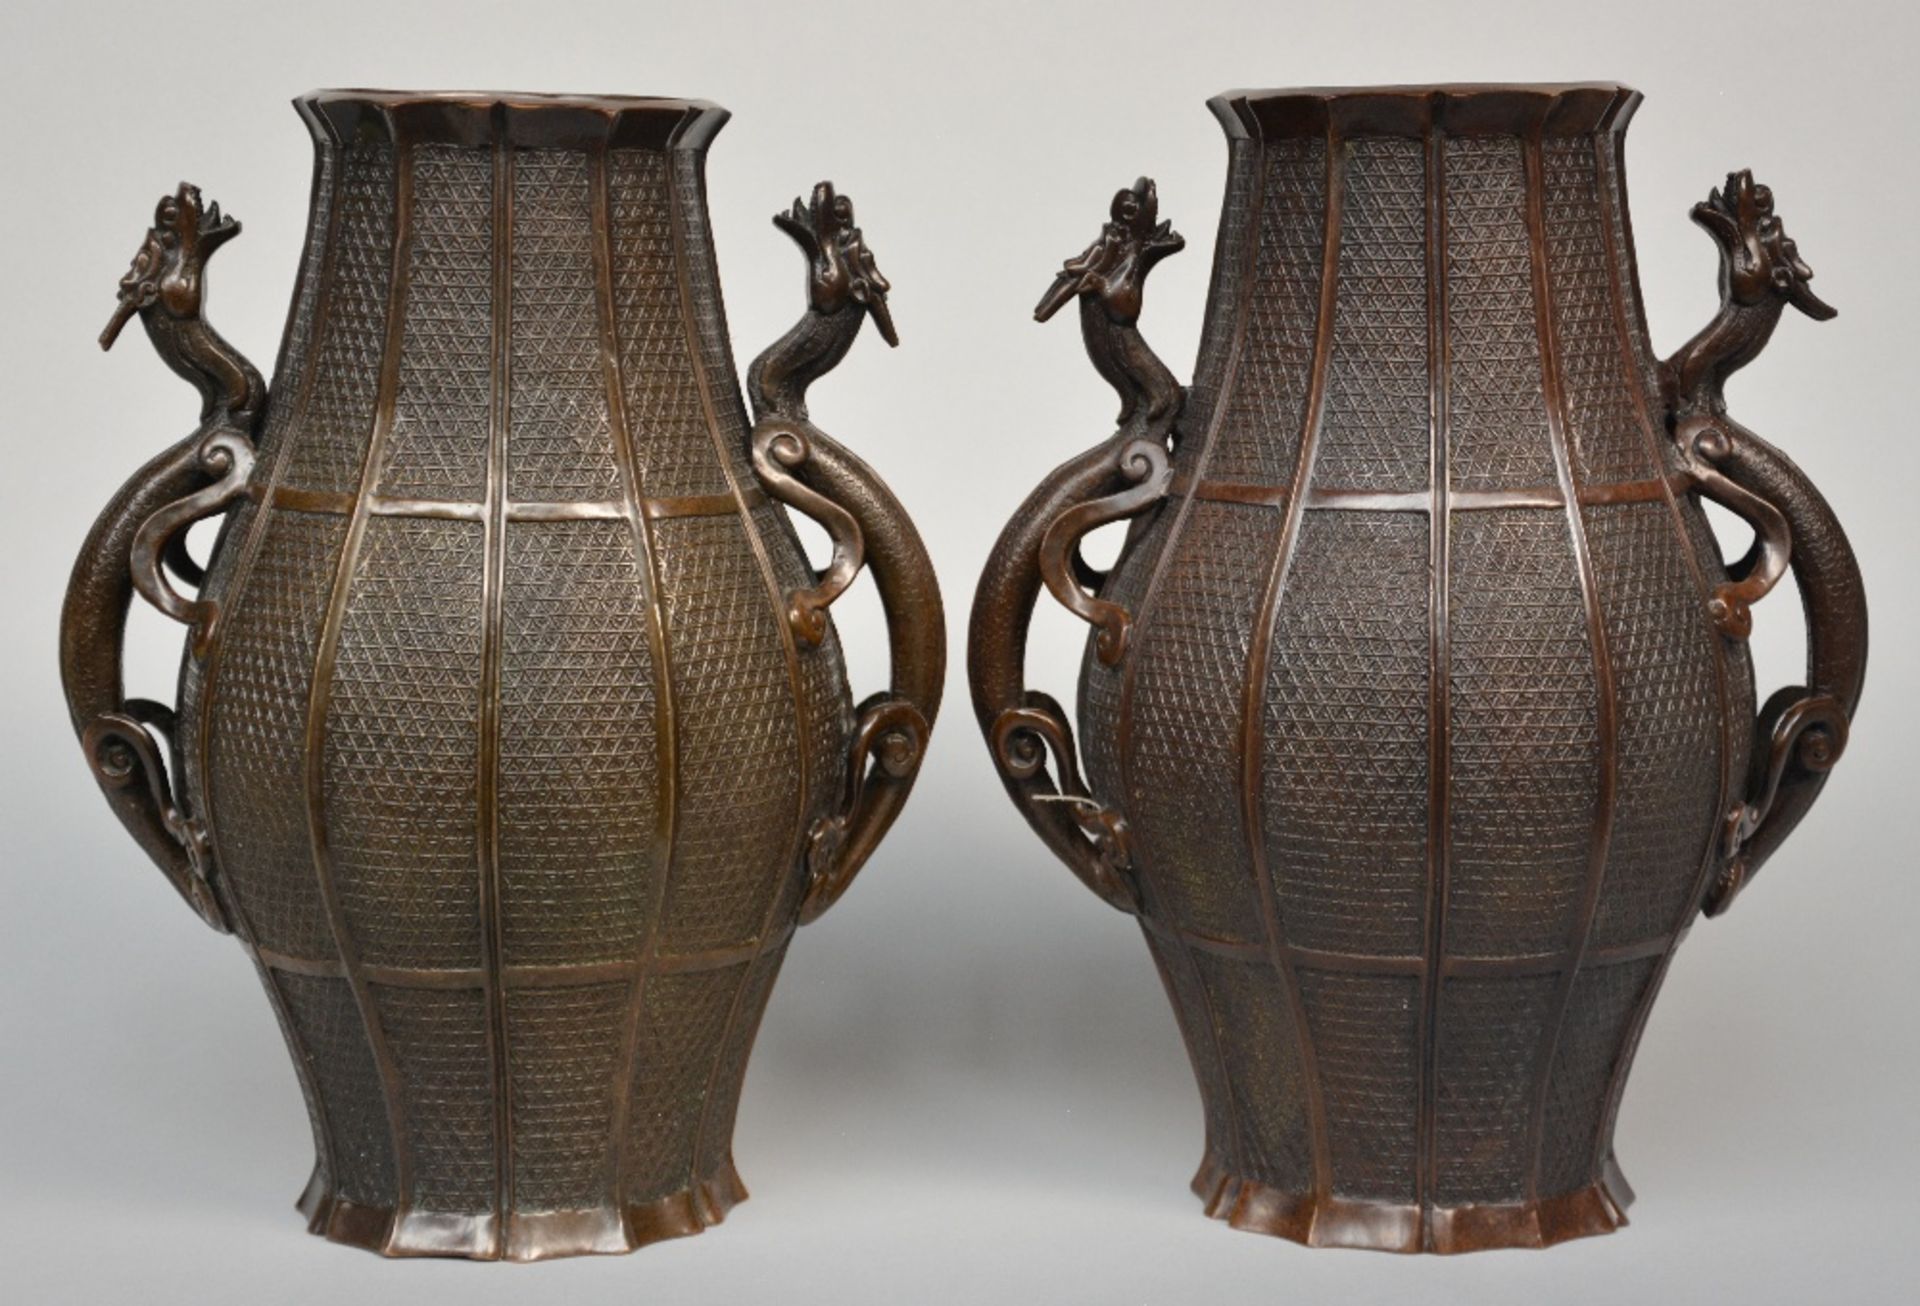 A pair of Oriental bronze vases with dragon relief decorations, marked, 19thC, H 37 cm